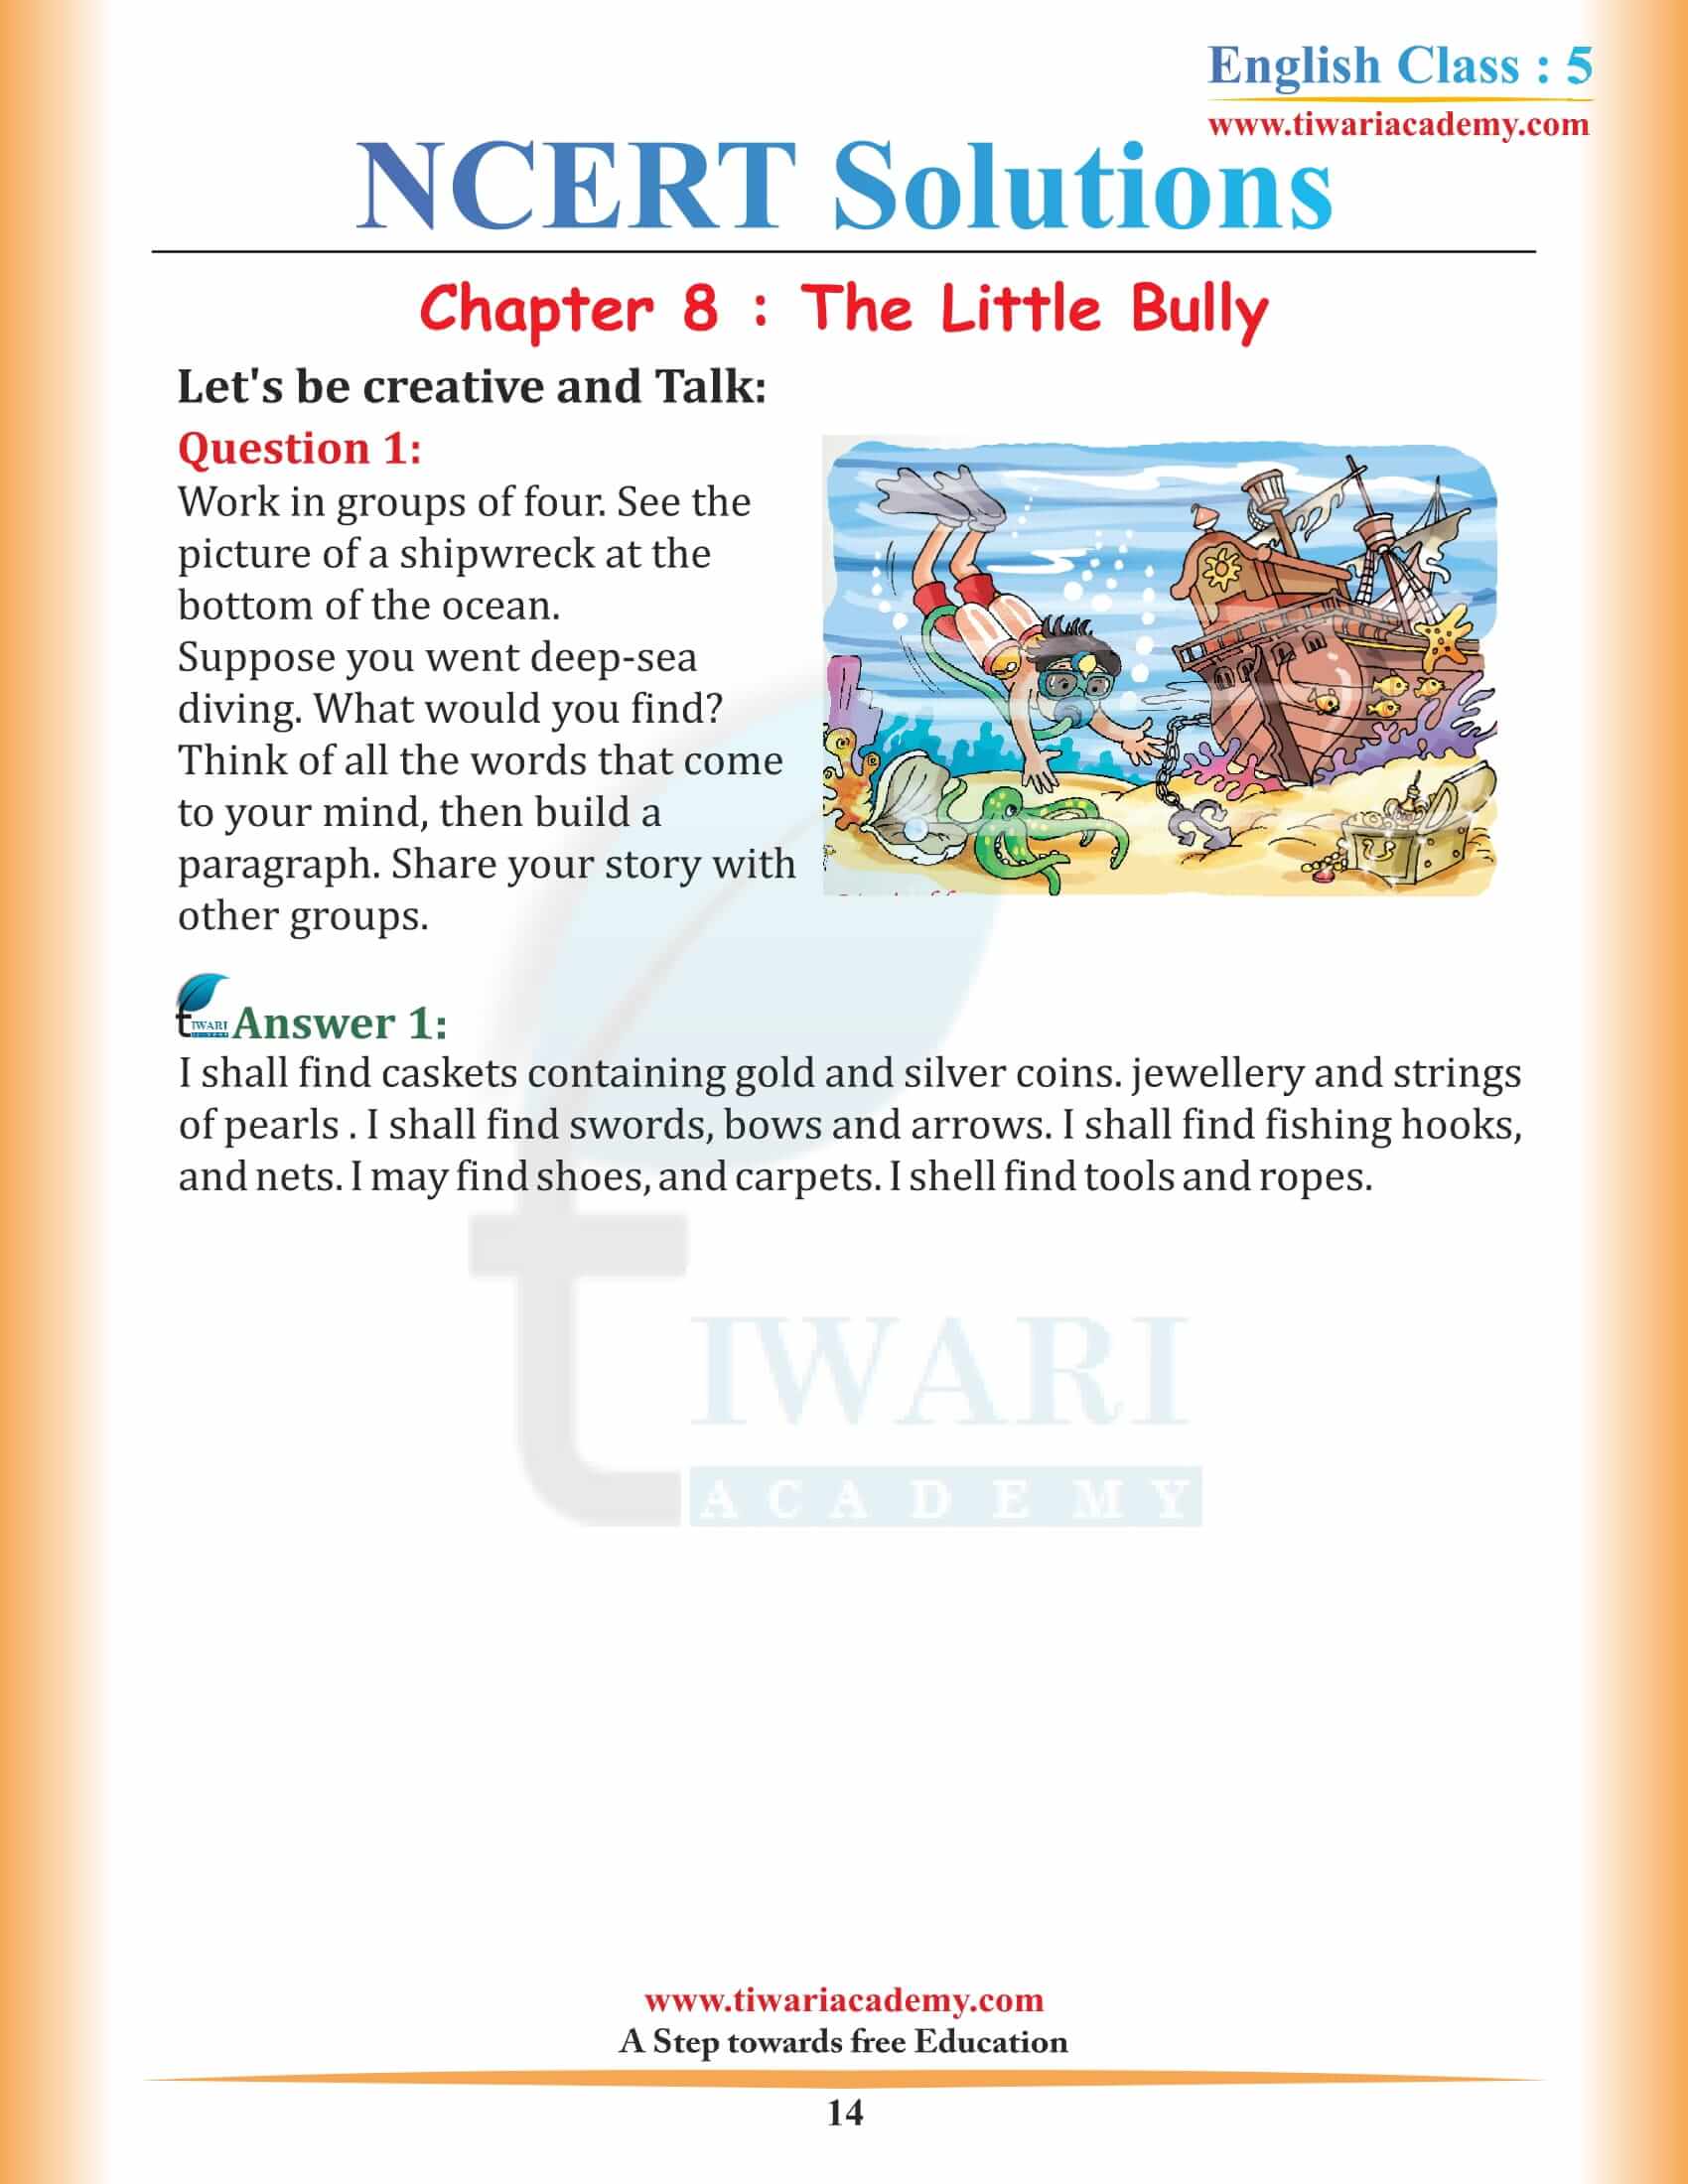 NCERT Solutions for Class 5 English Chapter 8 PDF